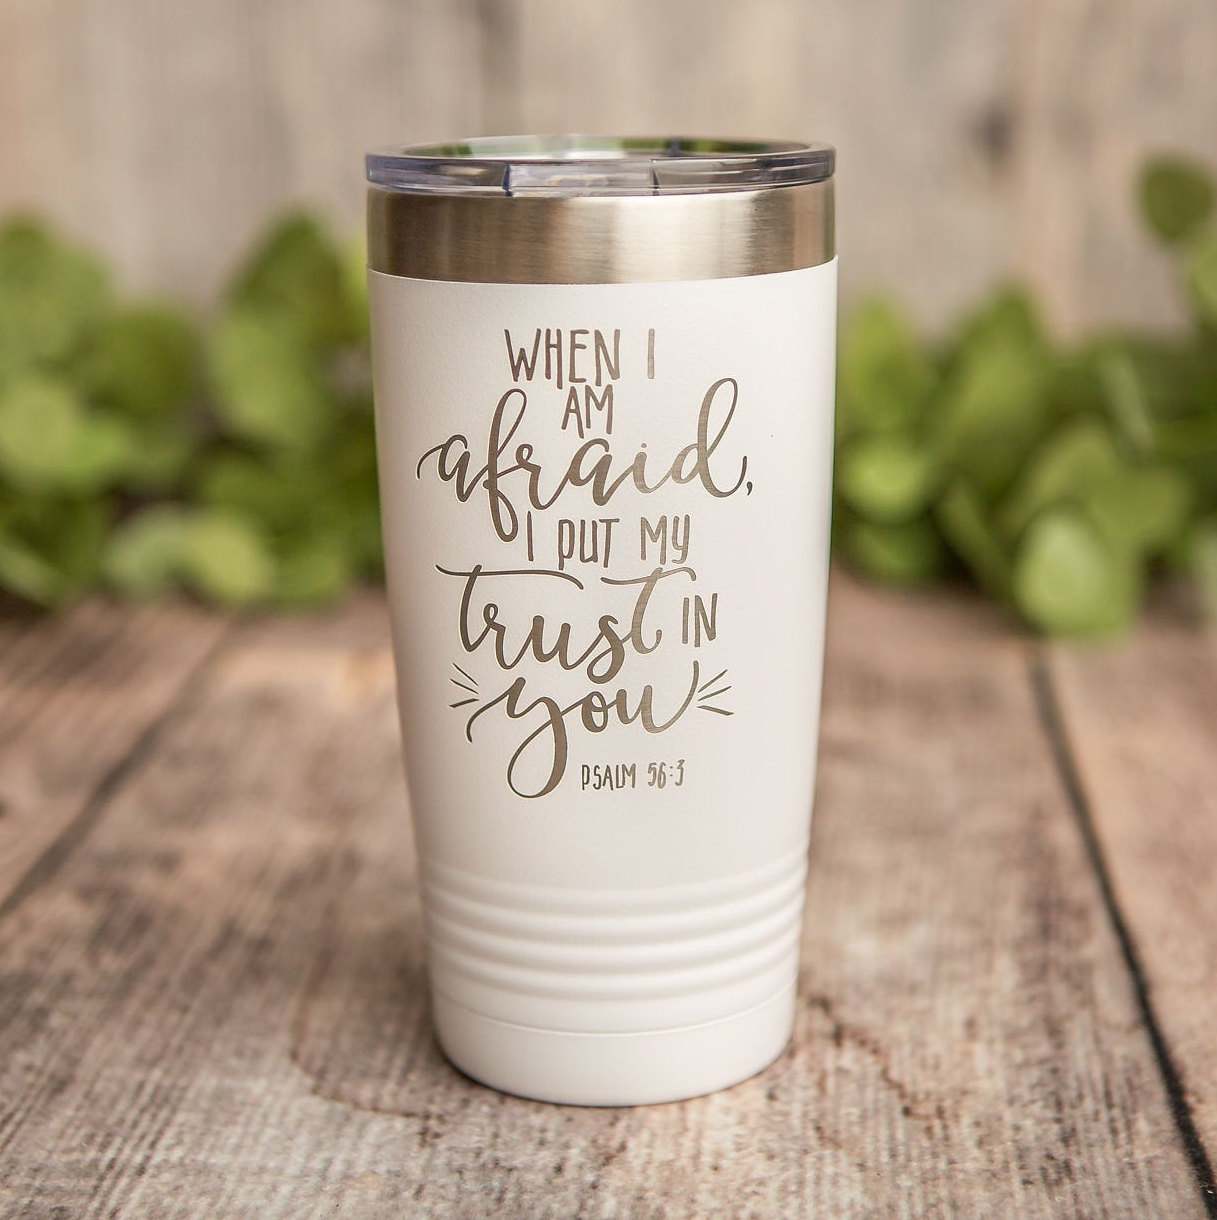 https://3cetching.com/wp-content/uploads/2020/09/when-i-am-afraid-engraved-stainless-steel-tumbler-religious-gift-christian-gift-tumbler-5f5fb83d.jpg